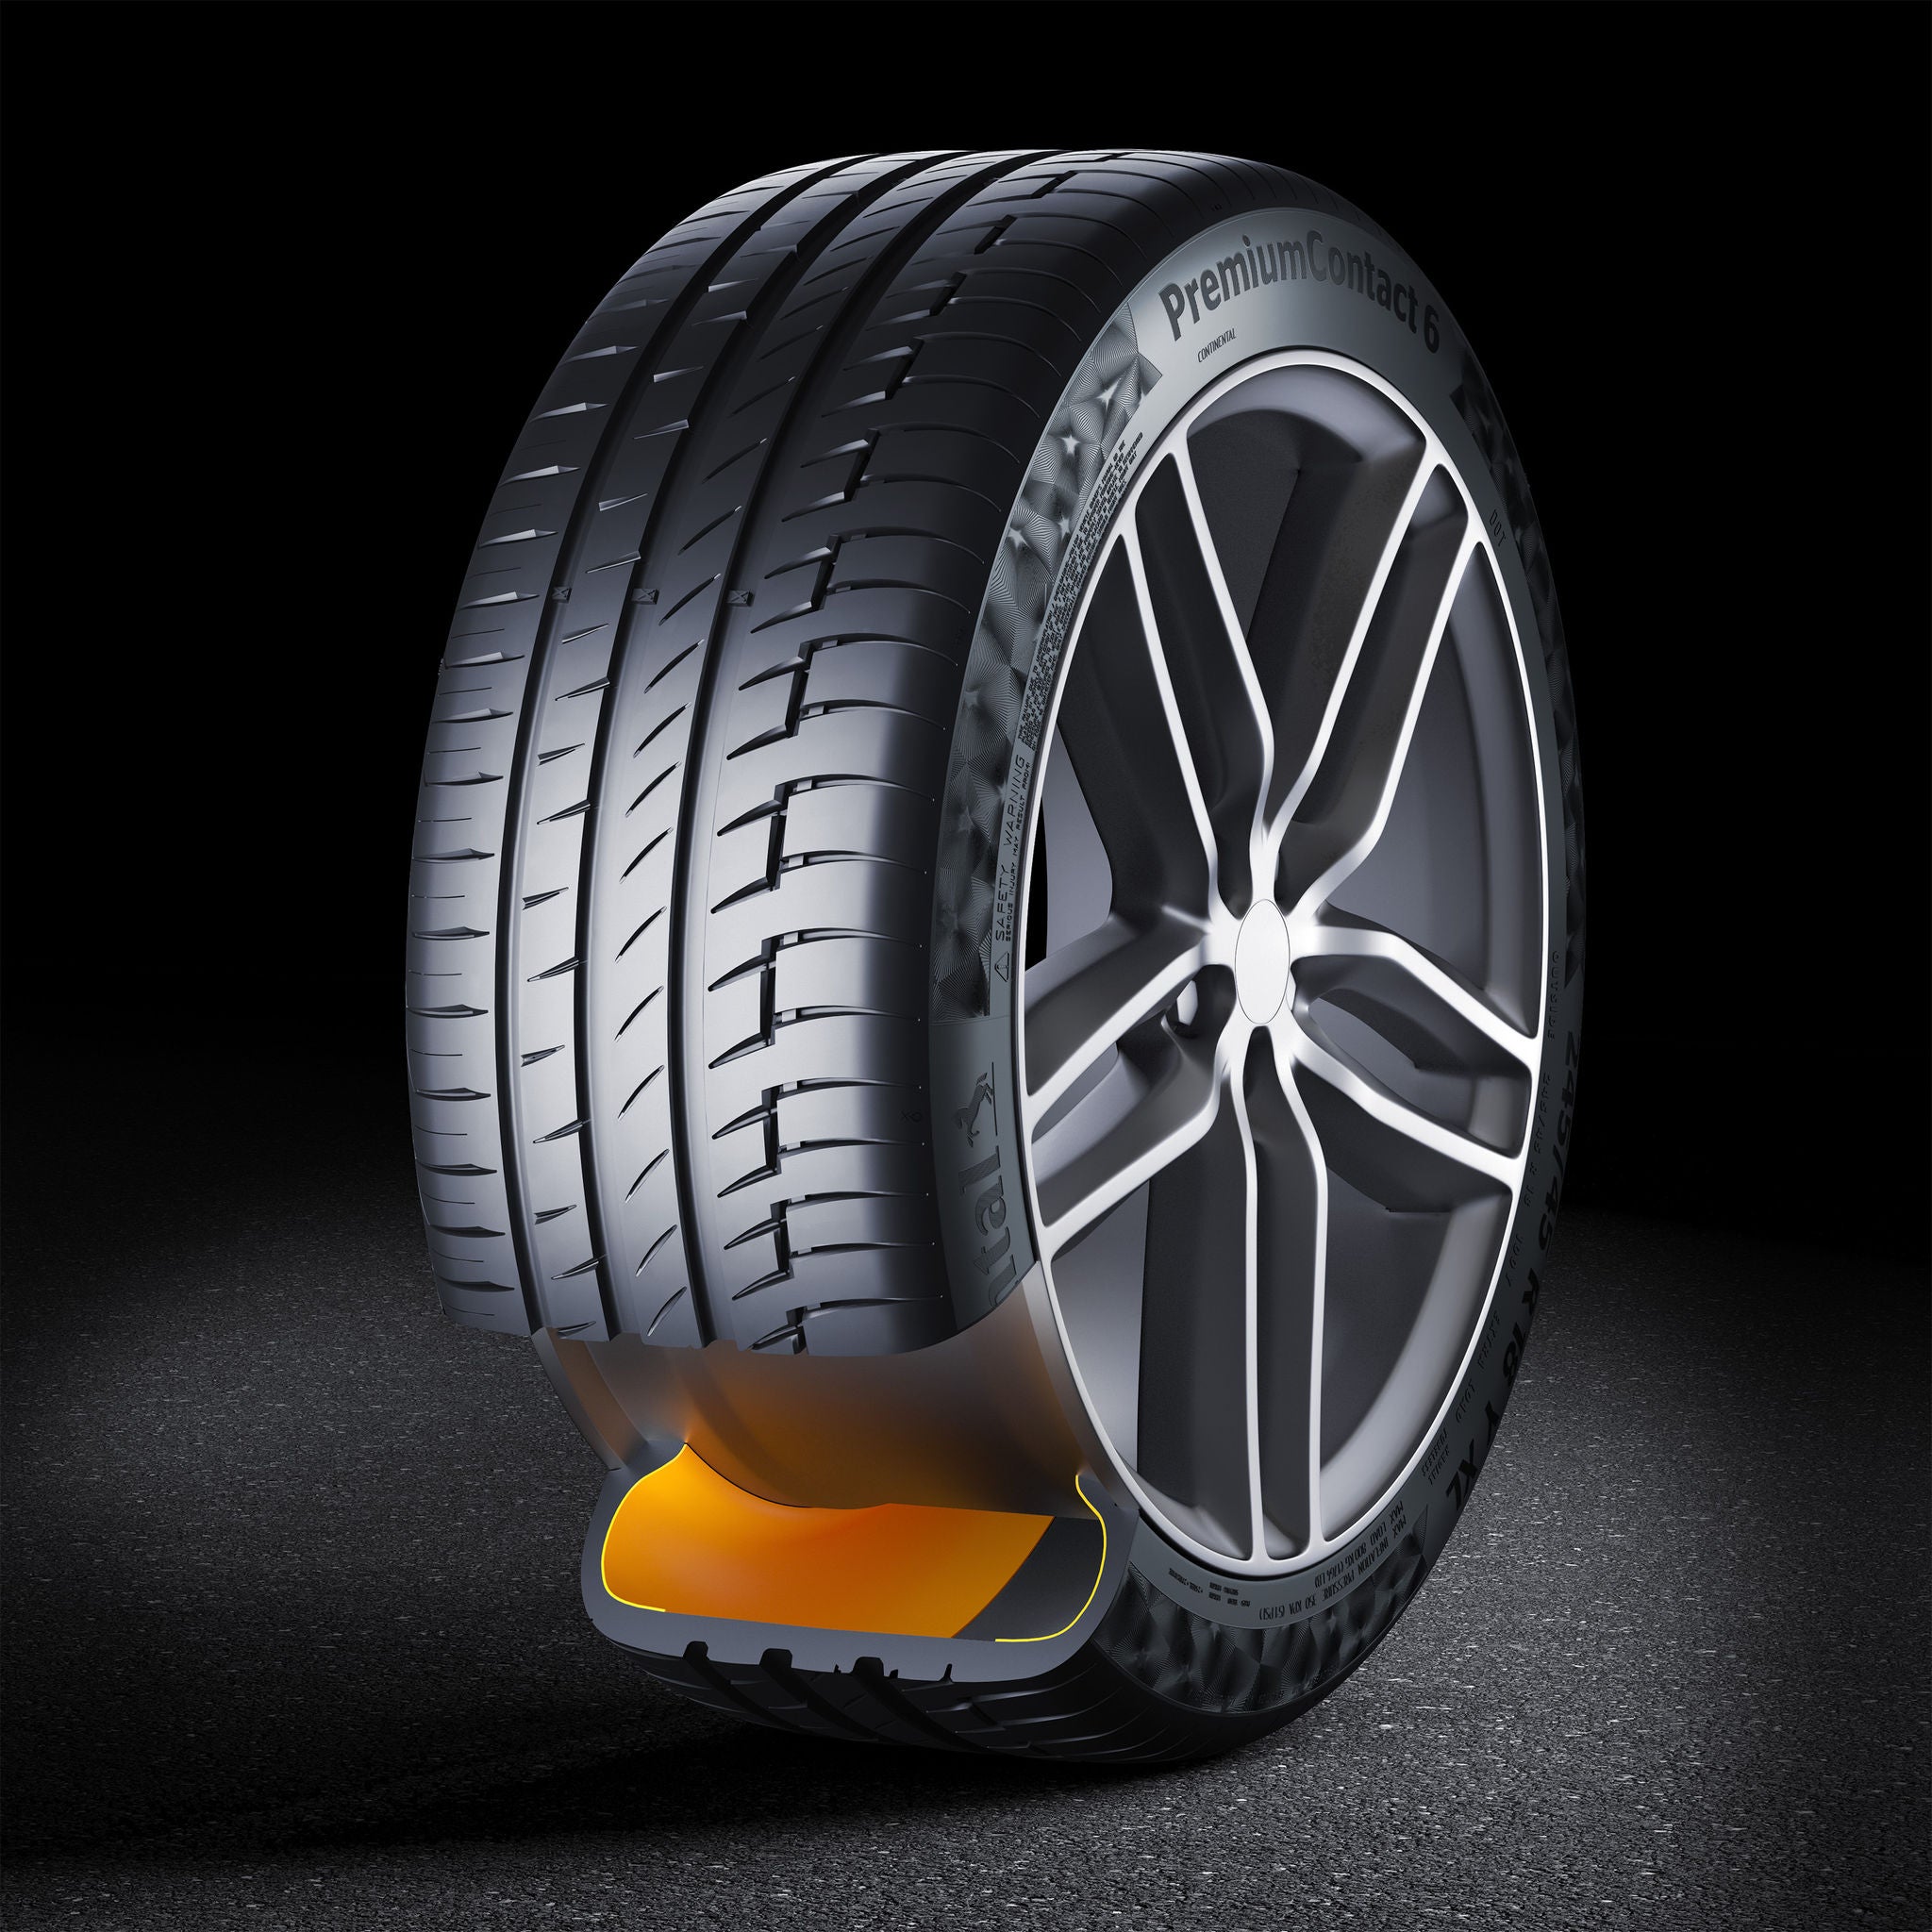 Self Supporting Runflat technology in a tire